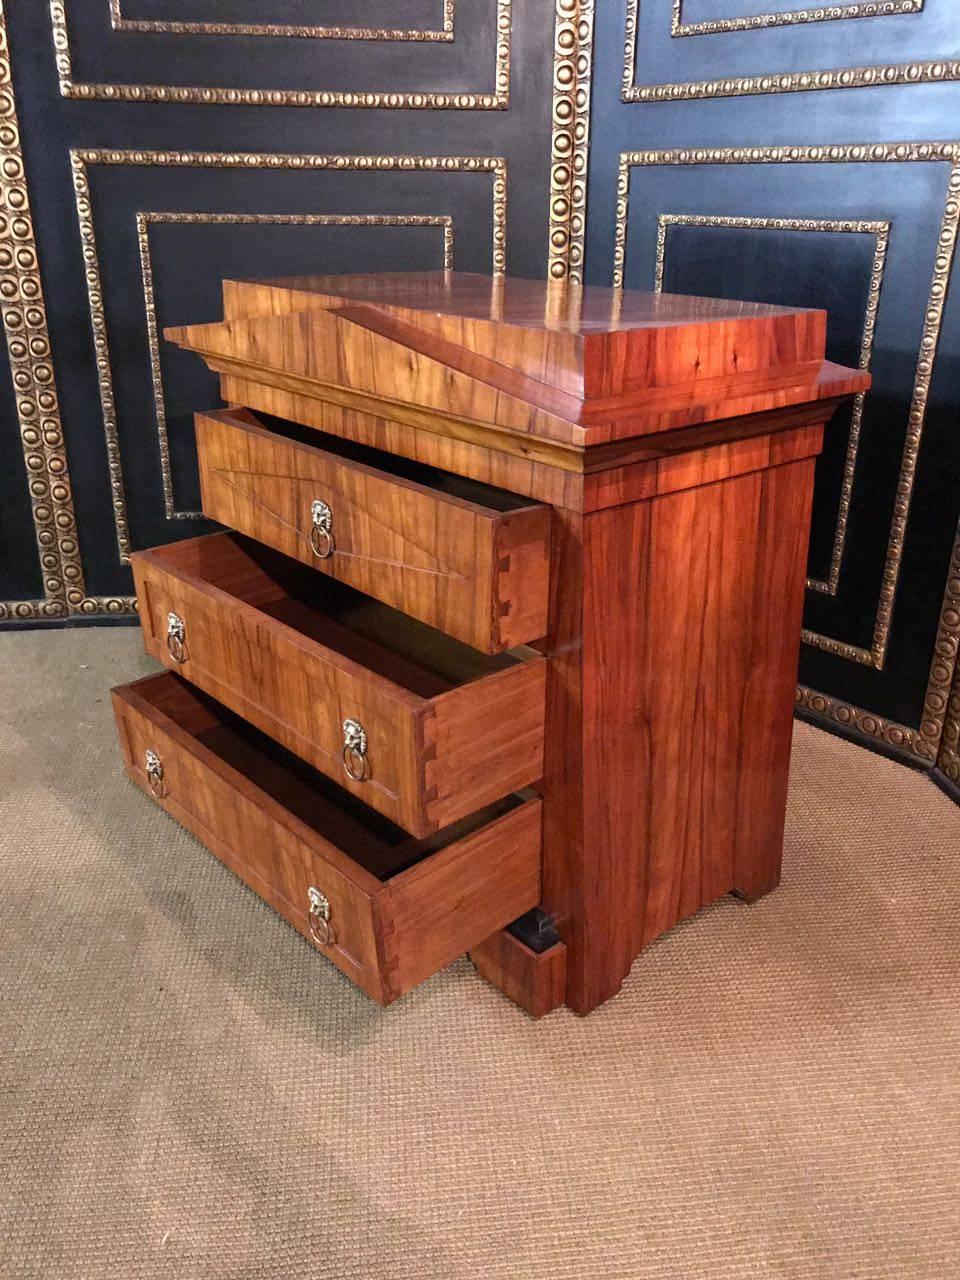 Mahogany on solid conifers. Conical body on profiled base. In the front, three casted drawers. Overhanging grooved profile inserts flat gusset, stepped with oval cover plate. Solenoid head fittings with grip rings. So called pyramid furniture are